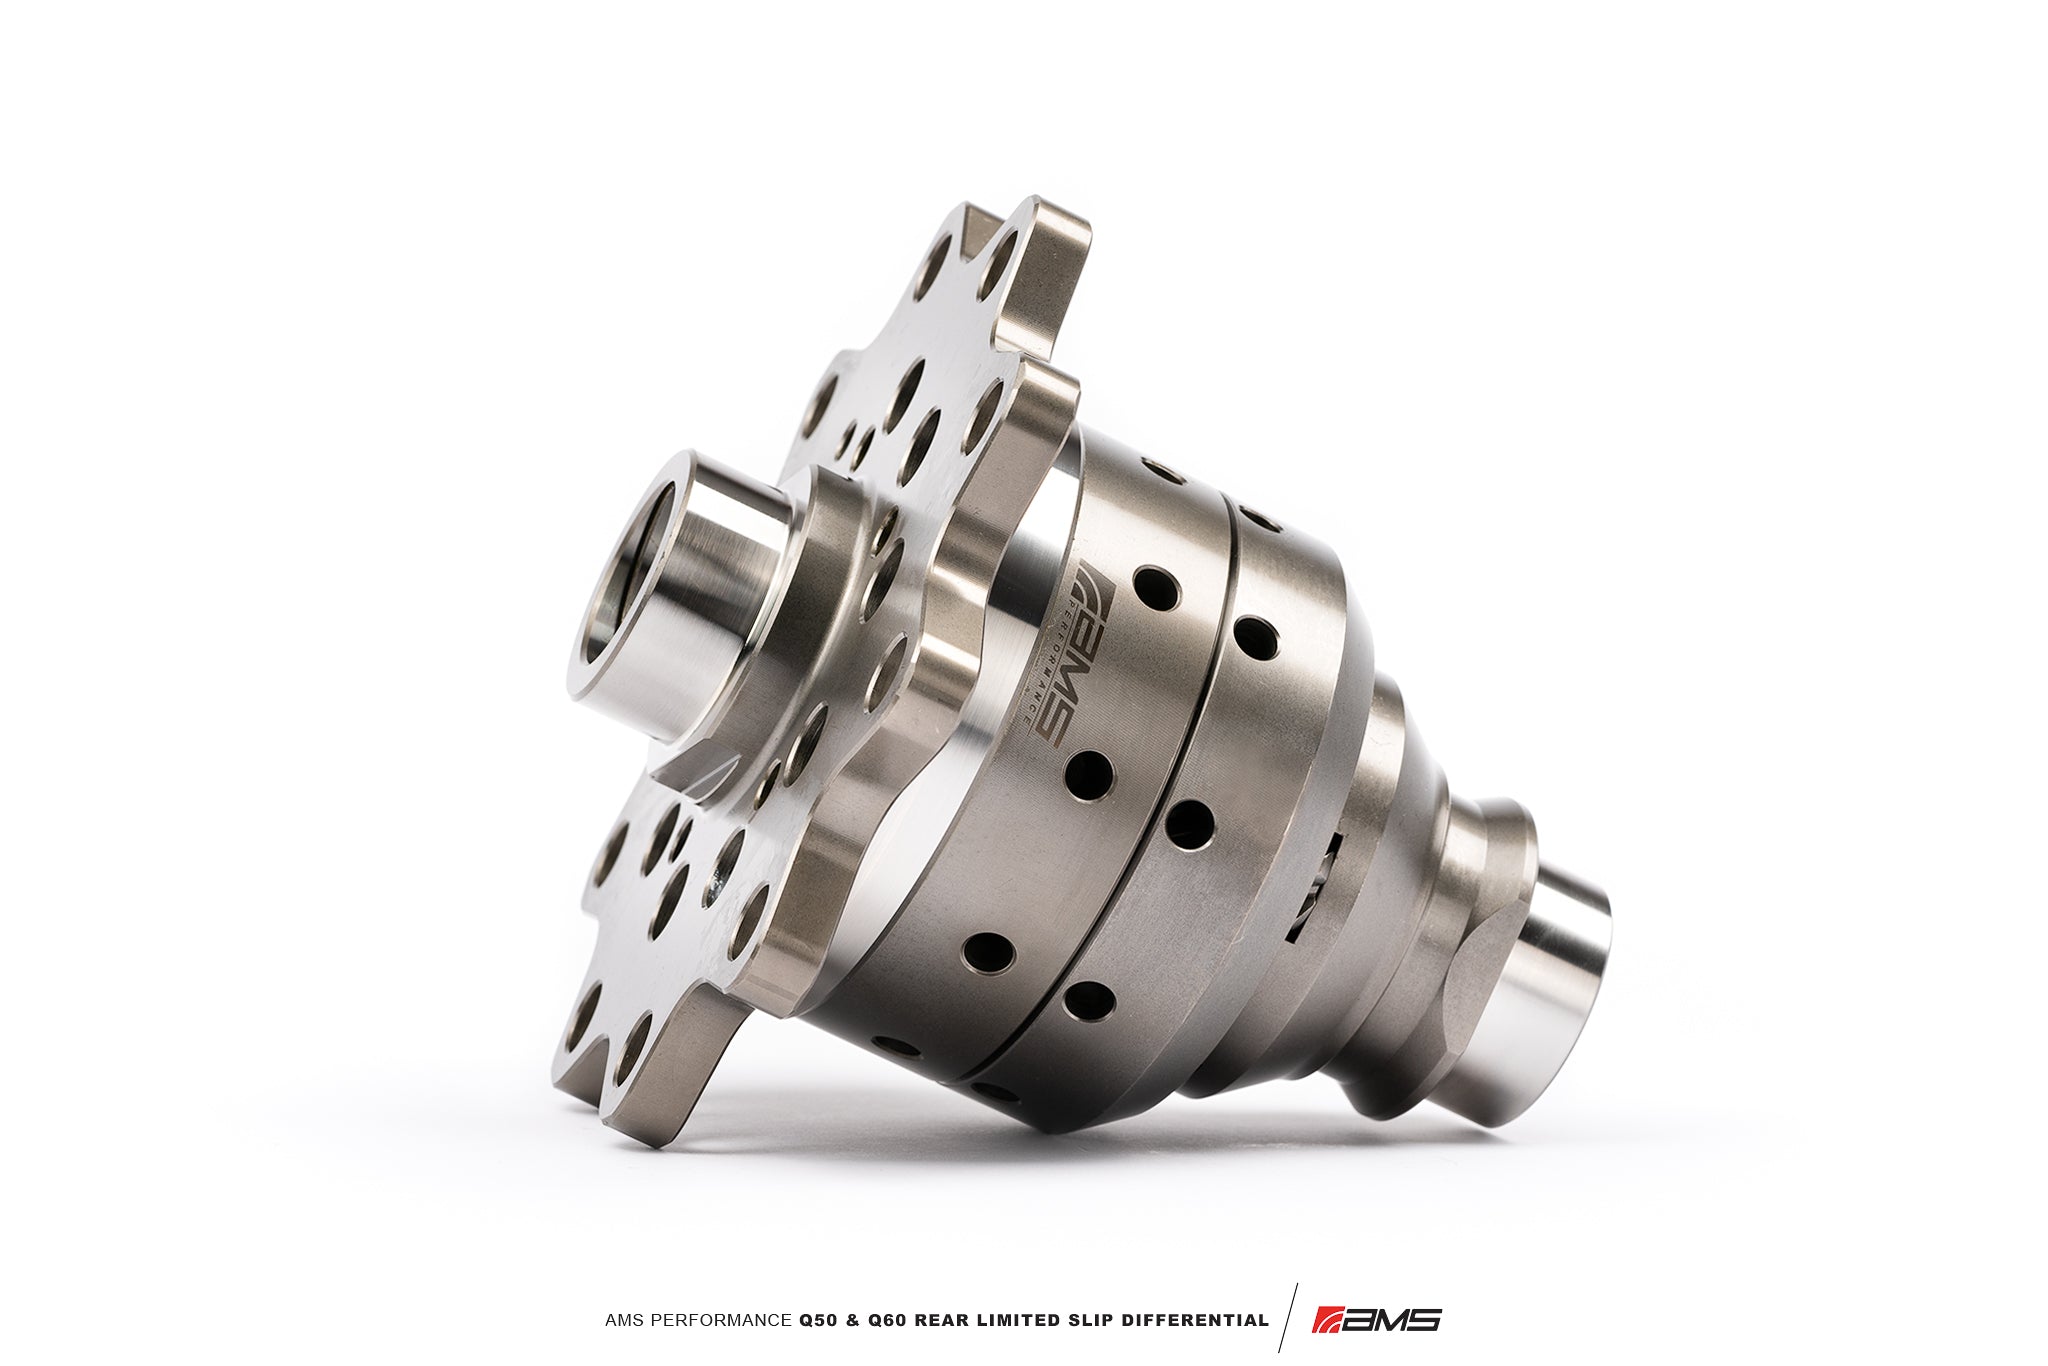 AMS PERFORMANCE Q50 & Q60 REAR LIMITED SLIP DIFFERENTIAL